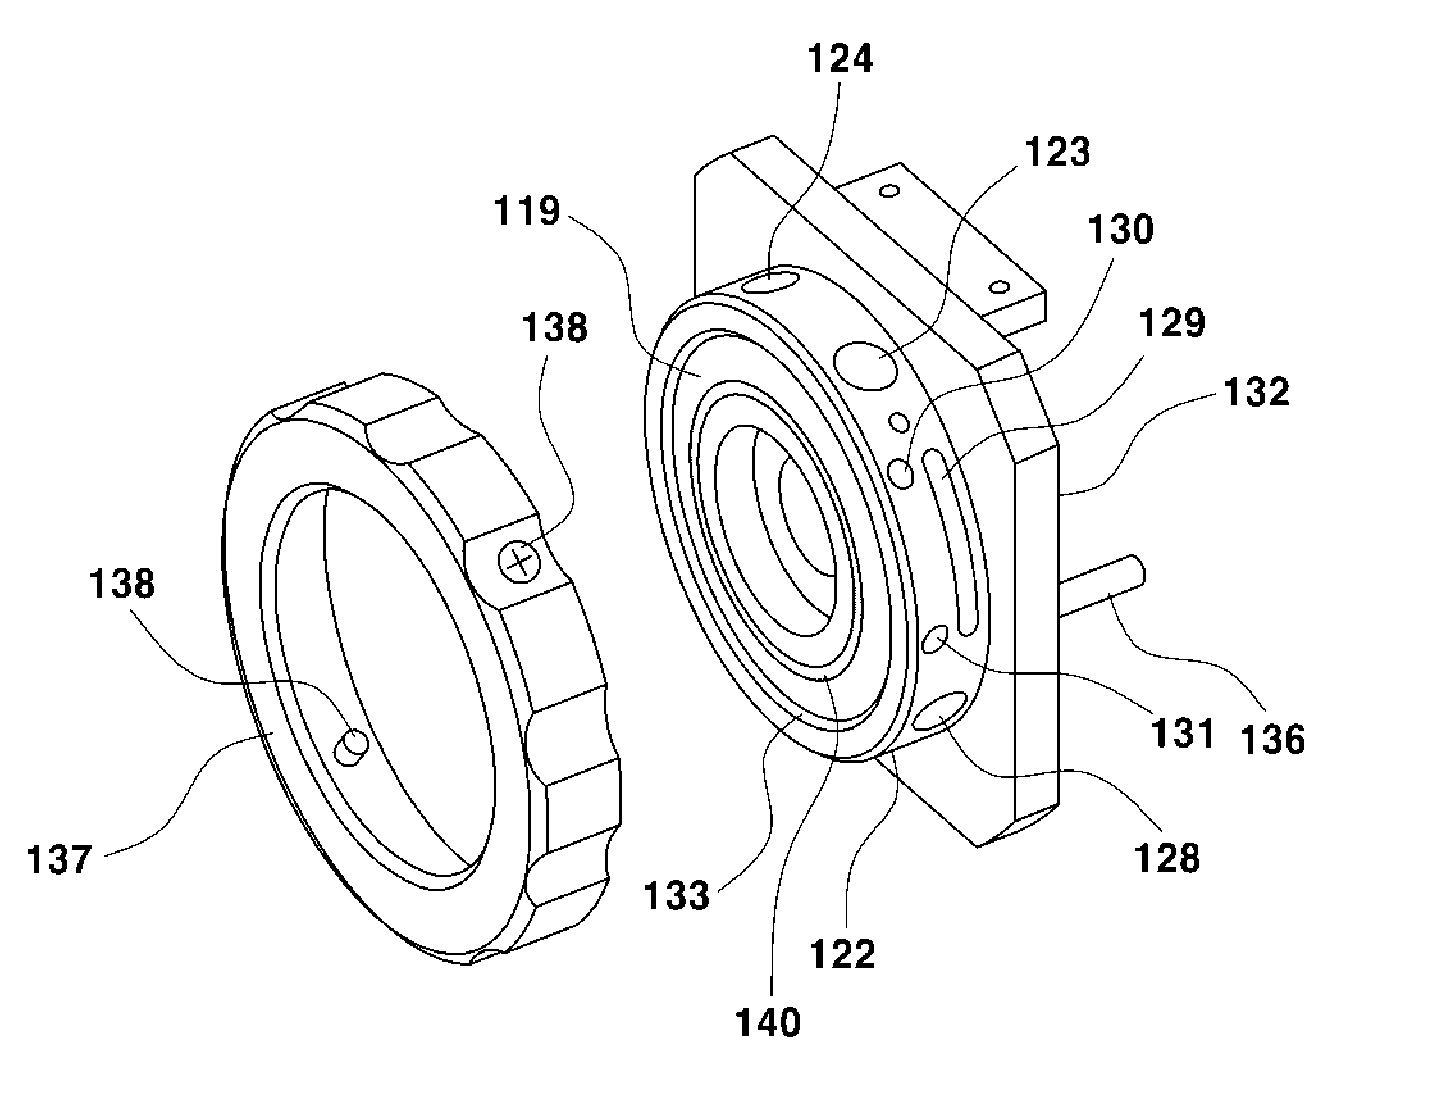 Filter switching device for fluorescence endoscopic television camera system